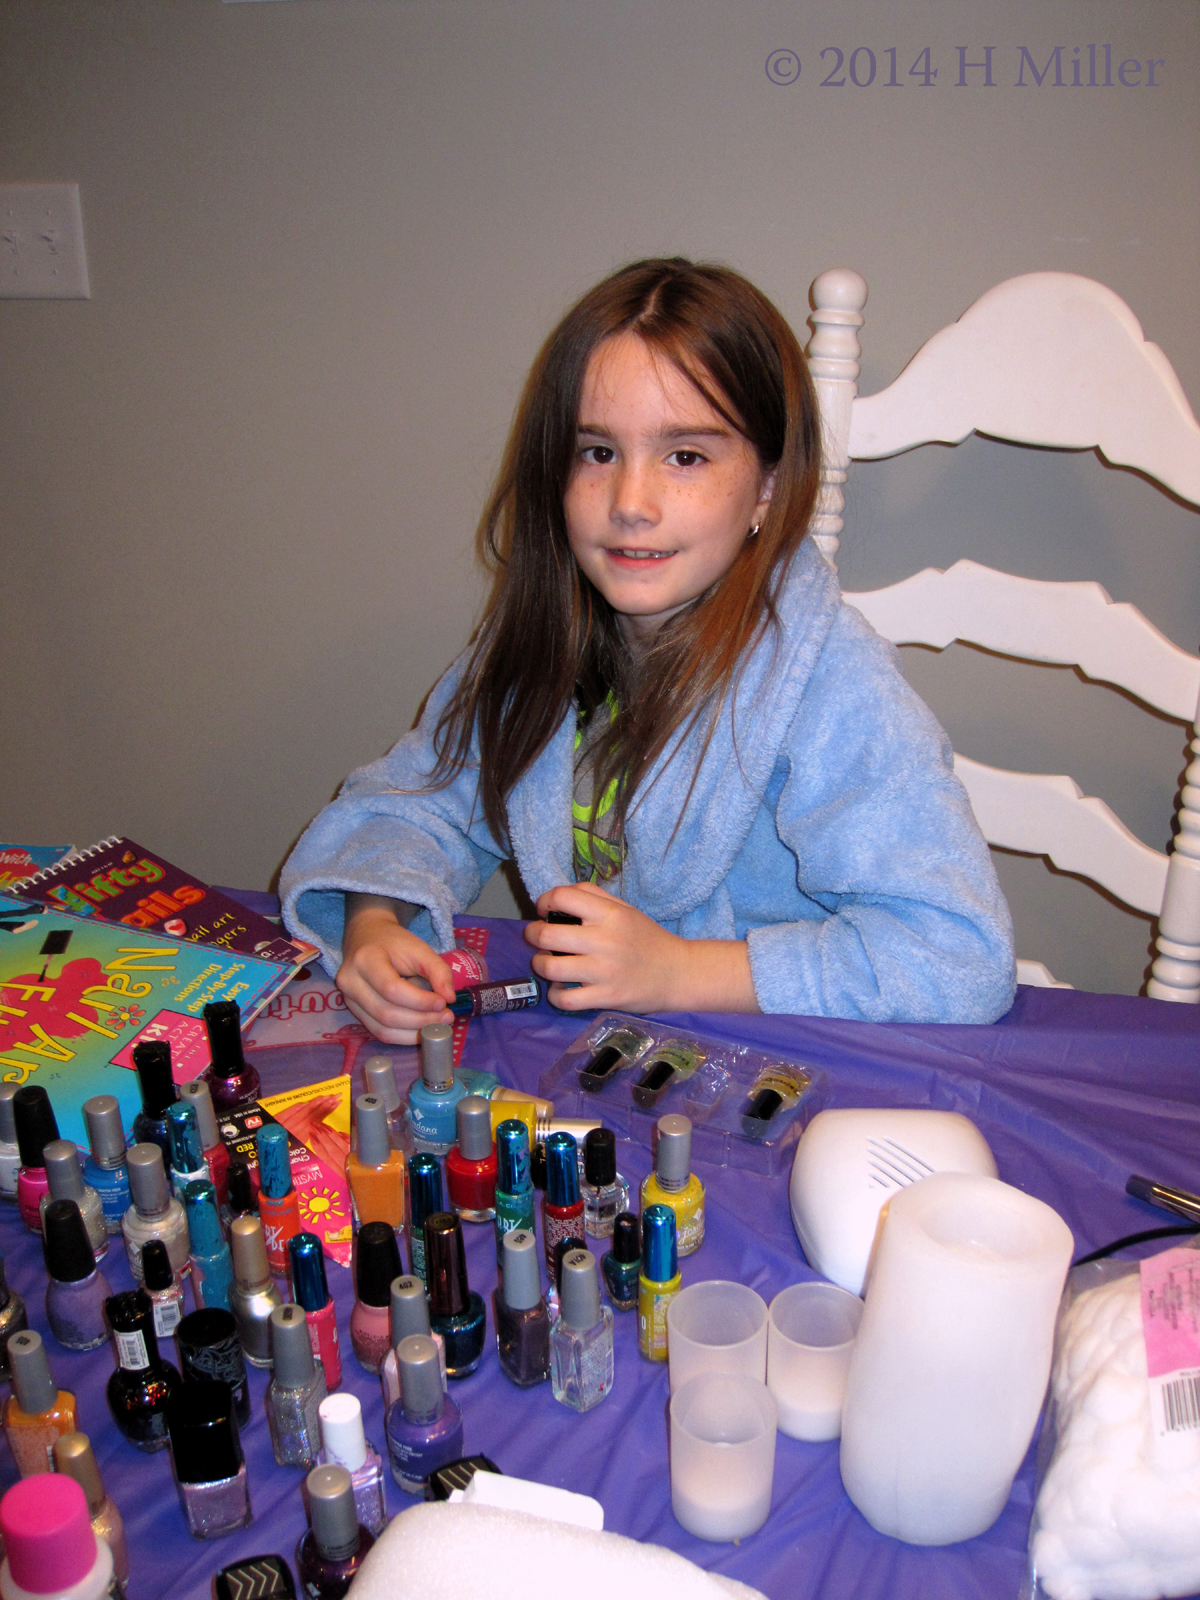 Choosing Colors For Her Nail Art. 